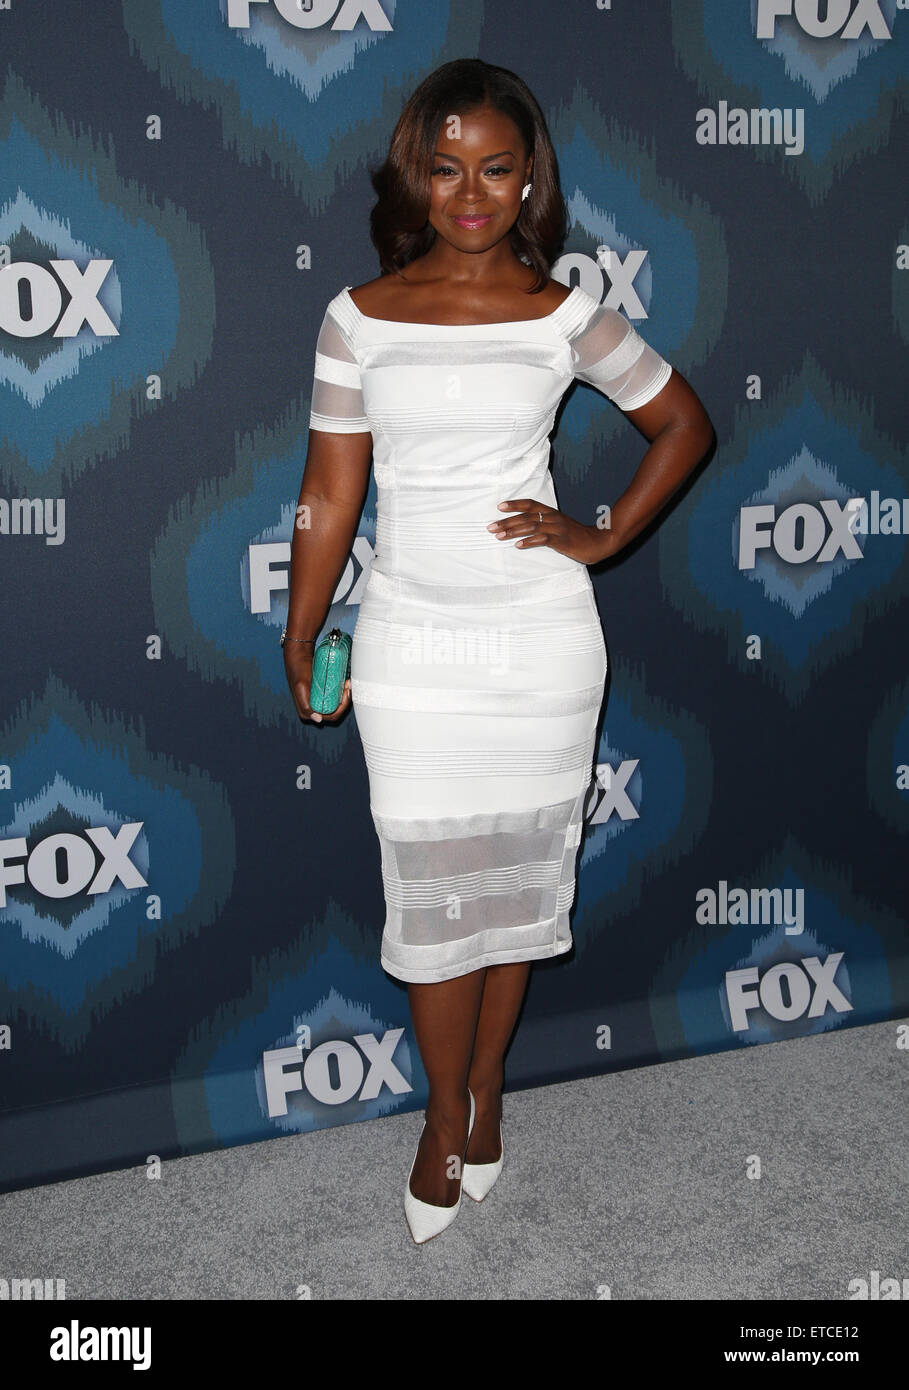 2015 FOX Winter Television Critics Association All-Star Party at the Langham Huntington Hotel - Arrivals  Featuring: Erica Tazel Where: Los Angeles, California, United States When: 17 Jan 2015 Credit: Brian To/WENN.com Stock Photo